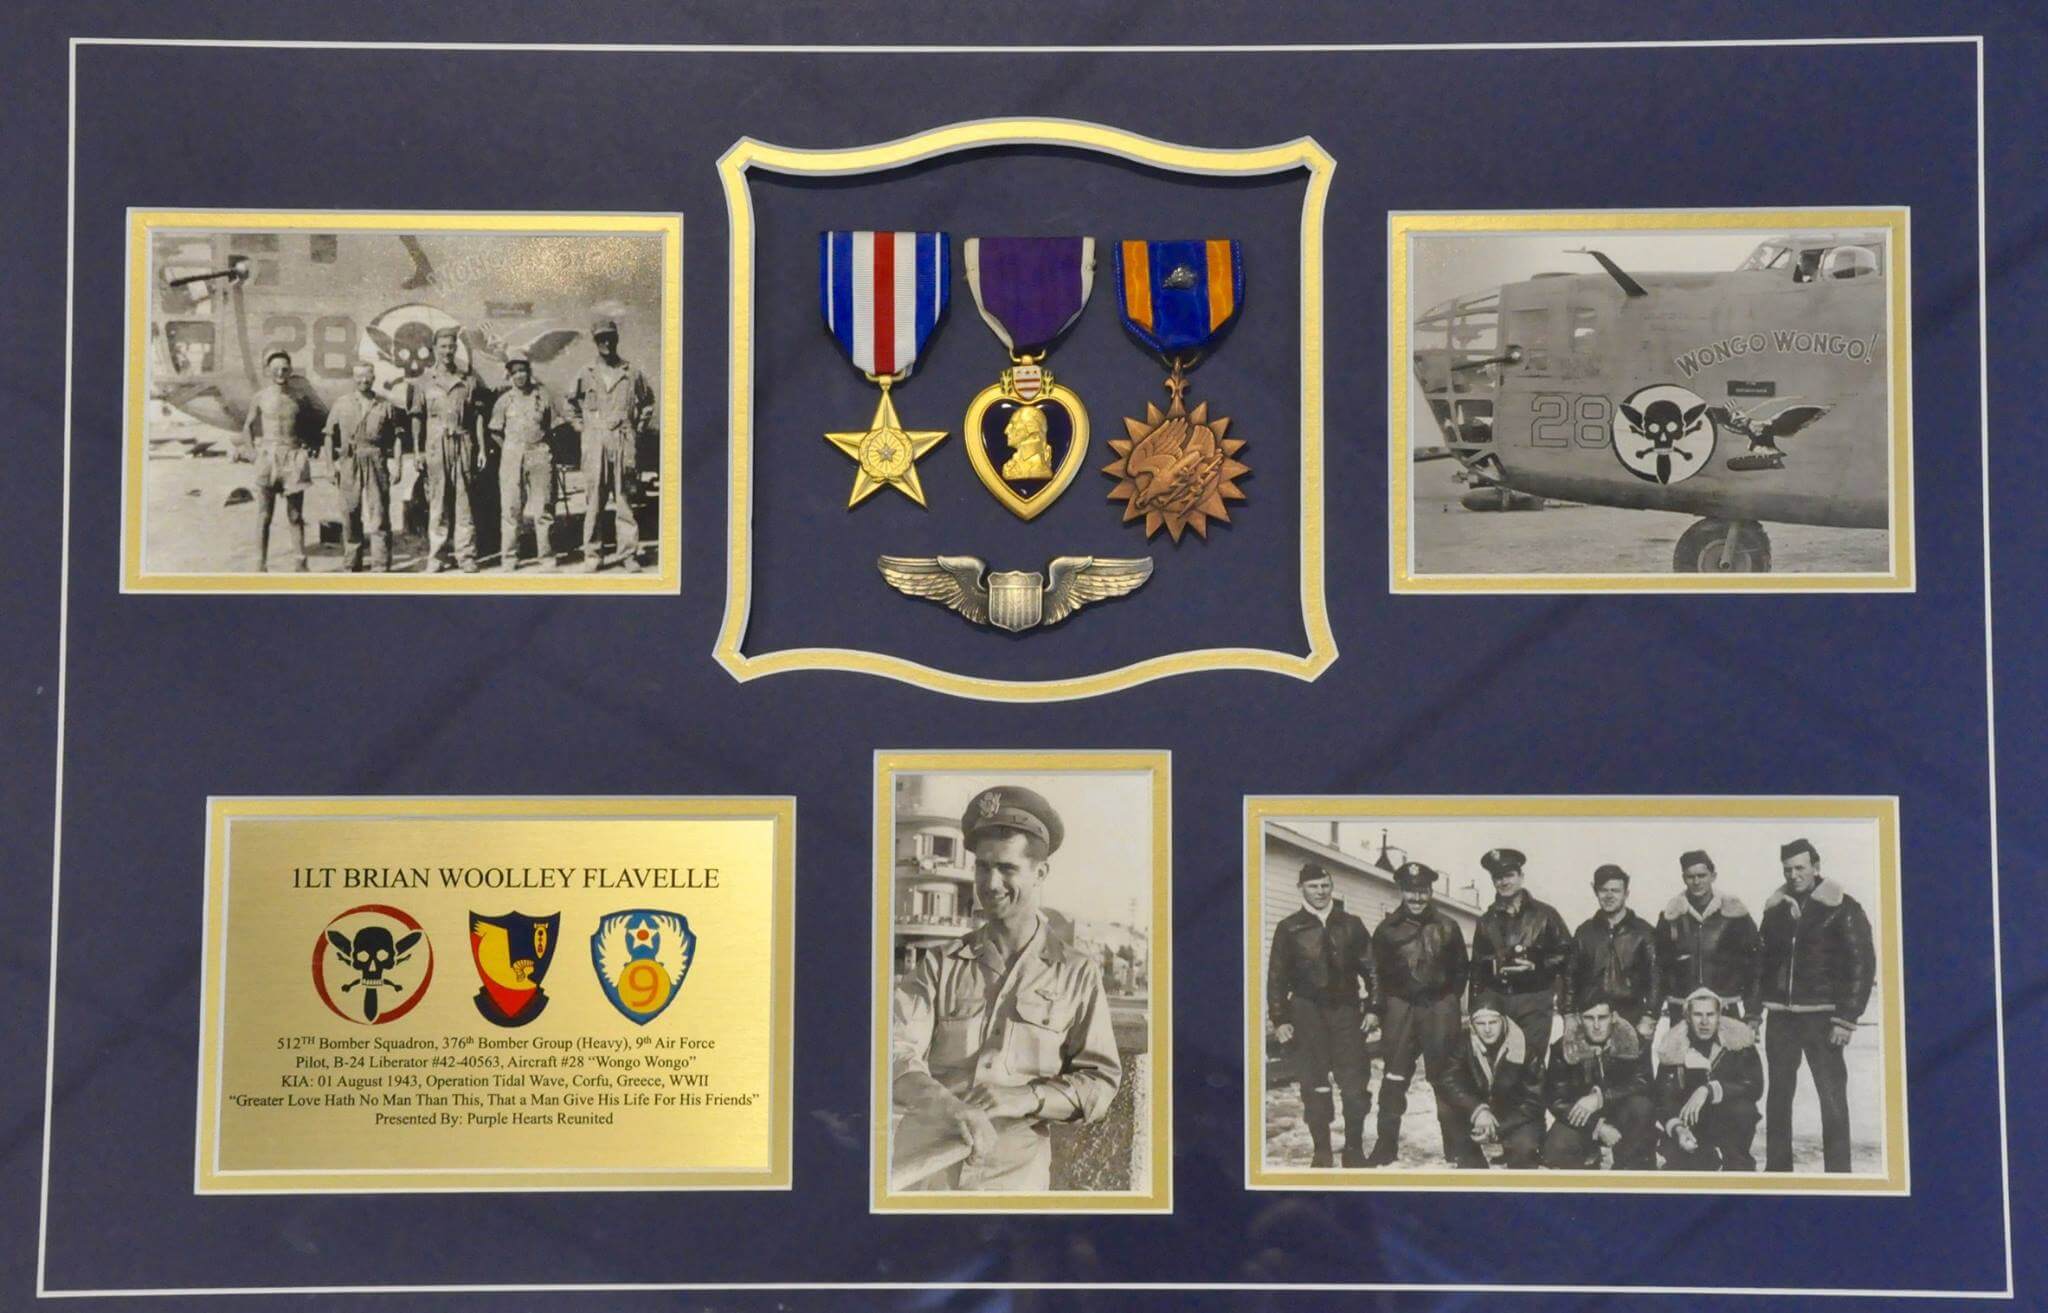 Plaque presented to the family of 1LT Brian Woolley Flavelle at 